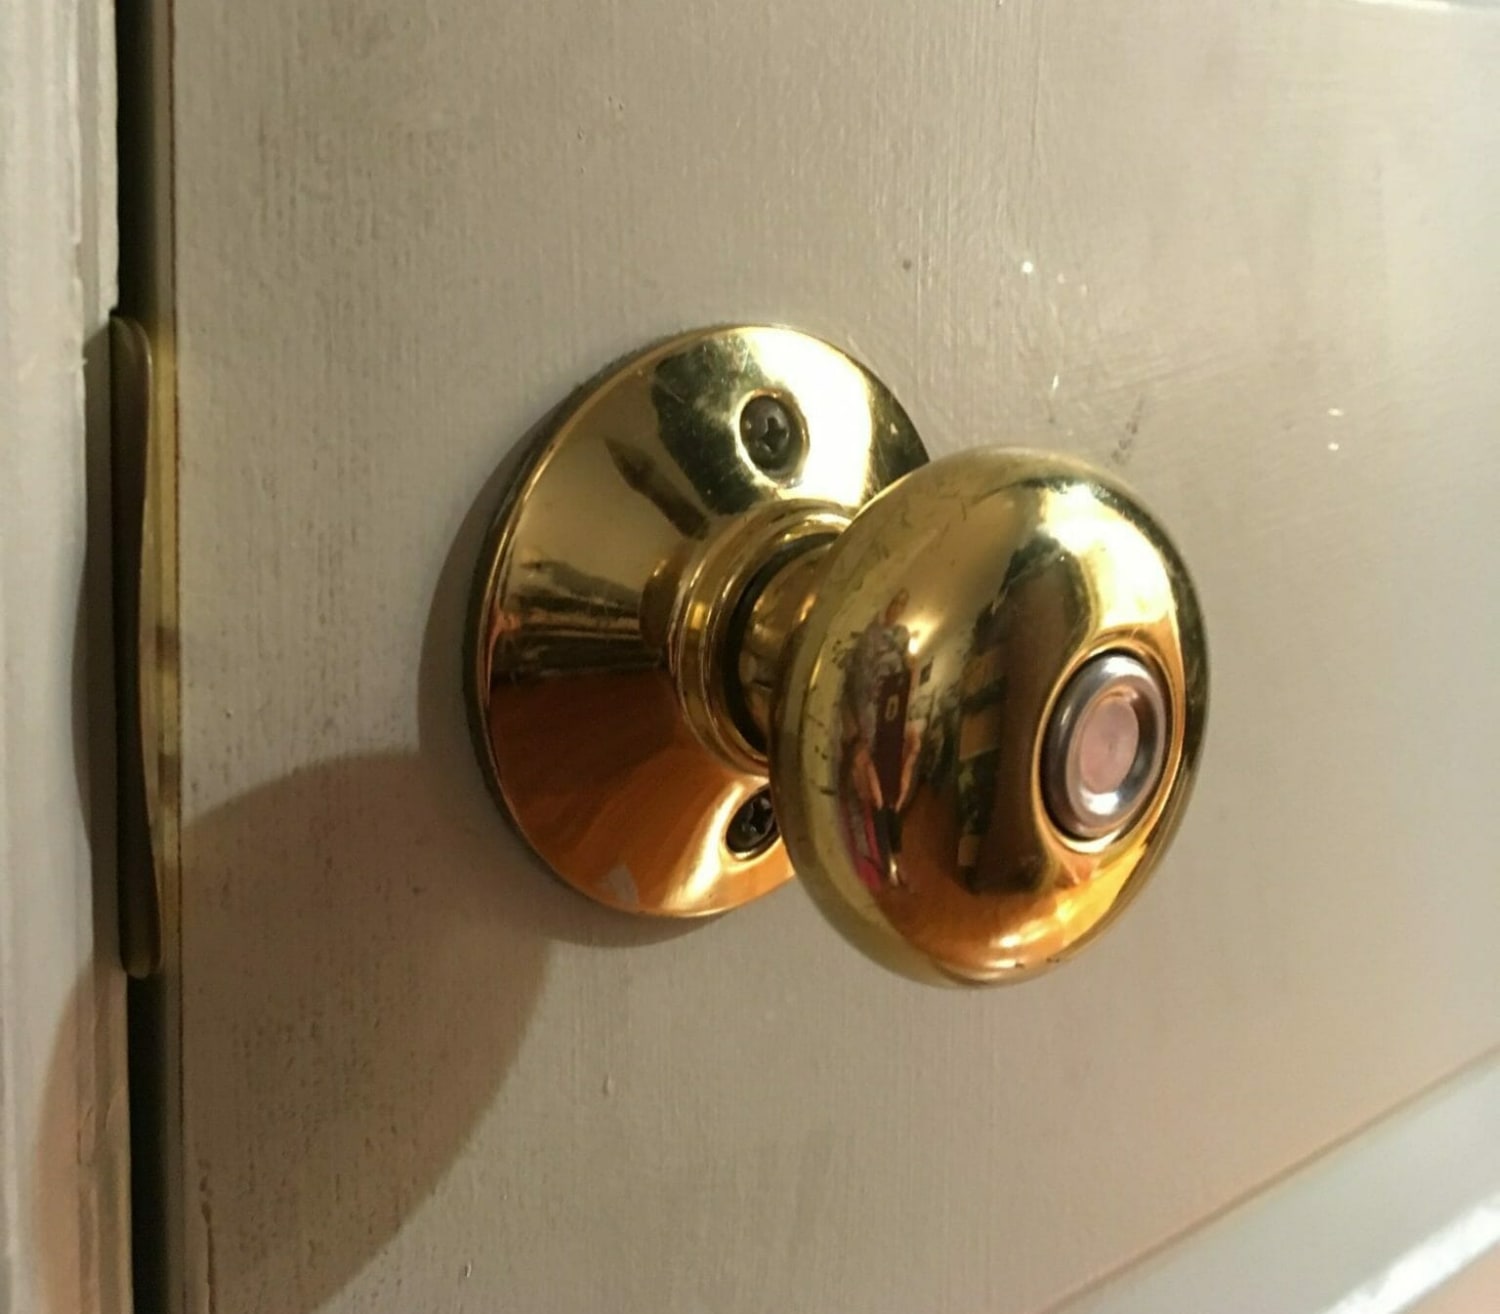 What To Do When Your Kid Locks You Out